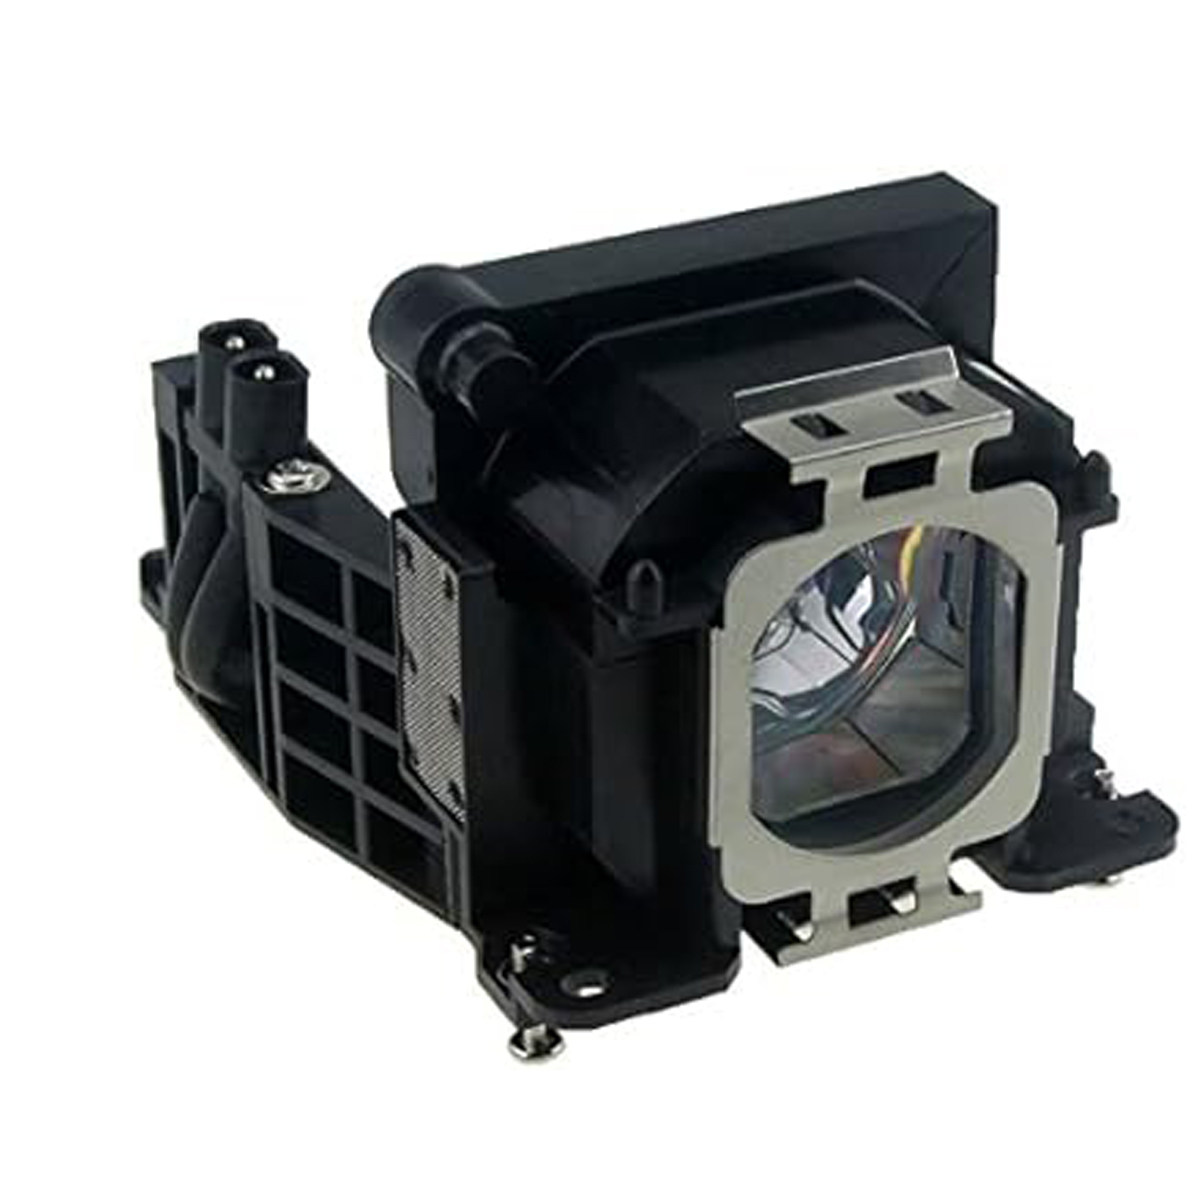 Replacement Projector lamp LMP-H160 For Sony VPL AW10 VPL AW10S VPL AW15